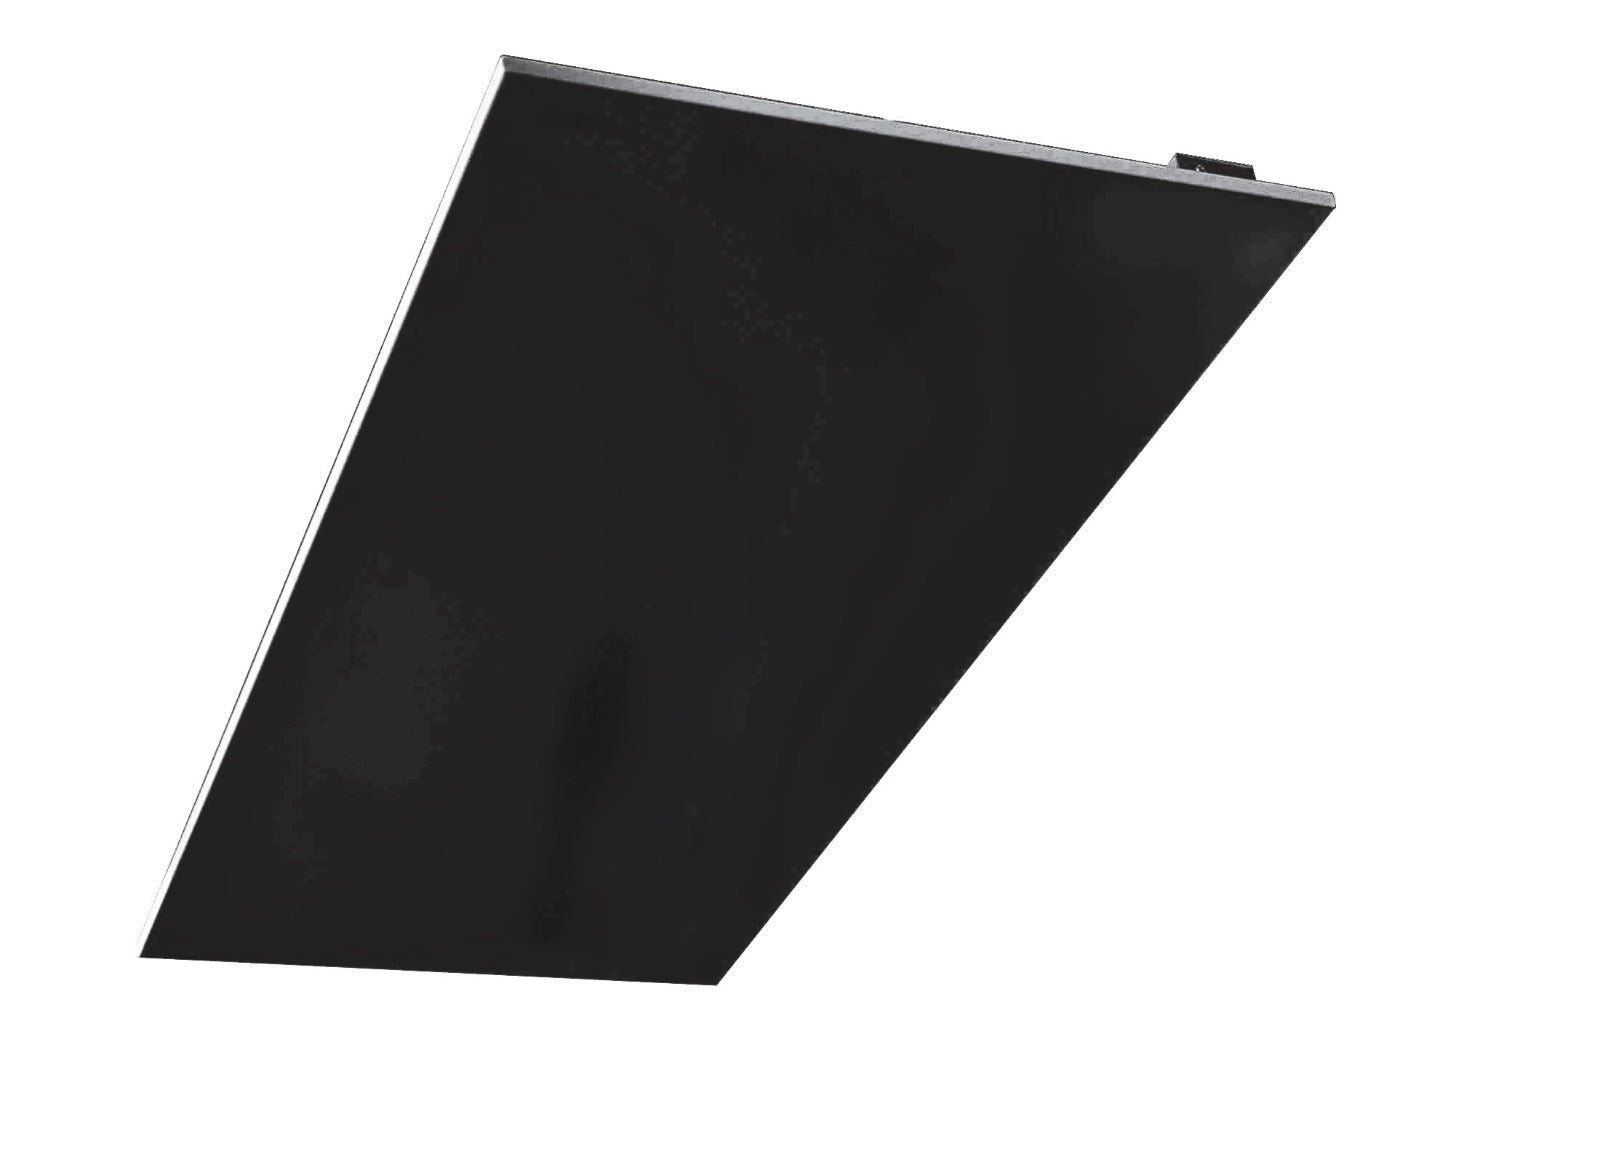 Far Infrared Heaters for Armstrong Suspended Ceiling Metal Black "LOTUS RANGE" 400-800 Watts